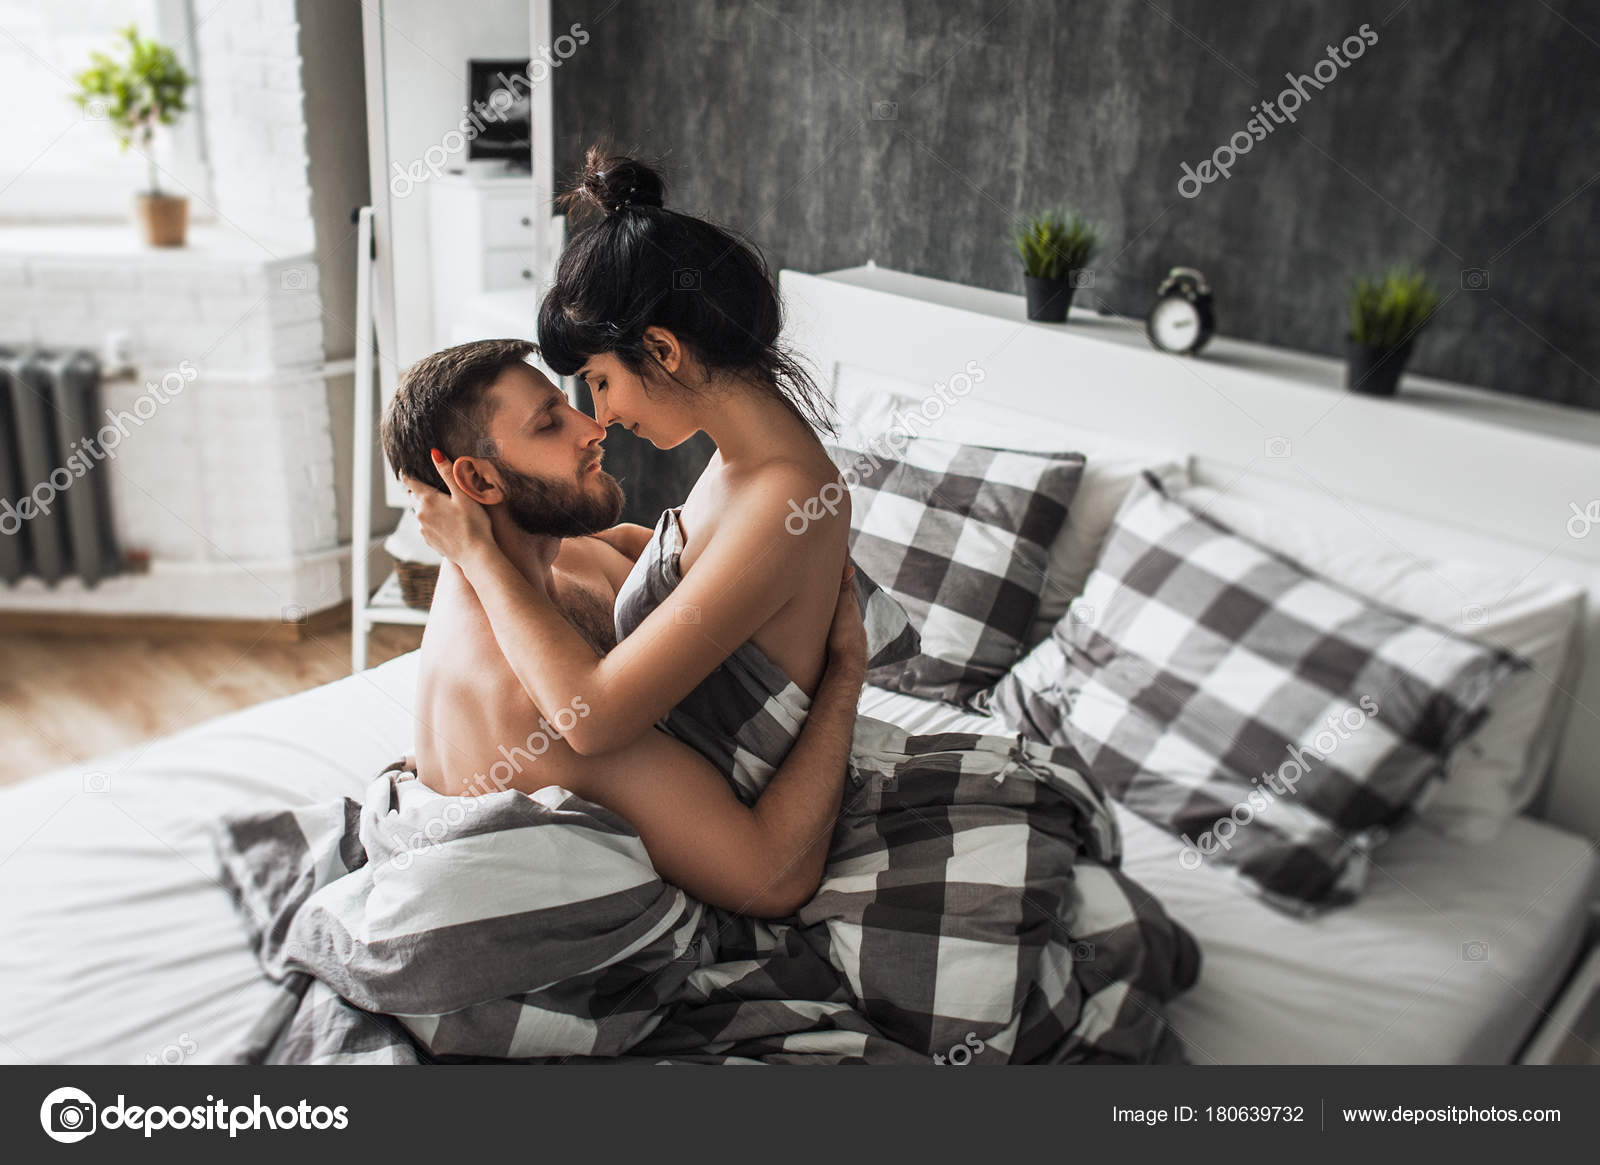 Man Woman Making Love Bed Loving Couple Bed Having Sex Stock Photo by ©sotnikov_mikhail@mail.ru 180639732 pic image